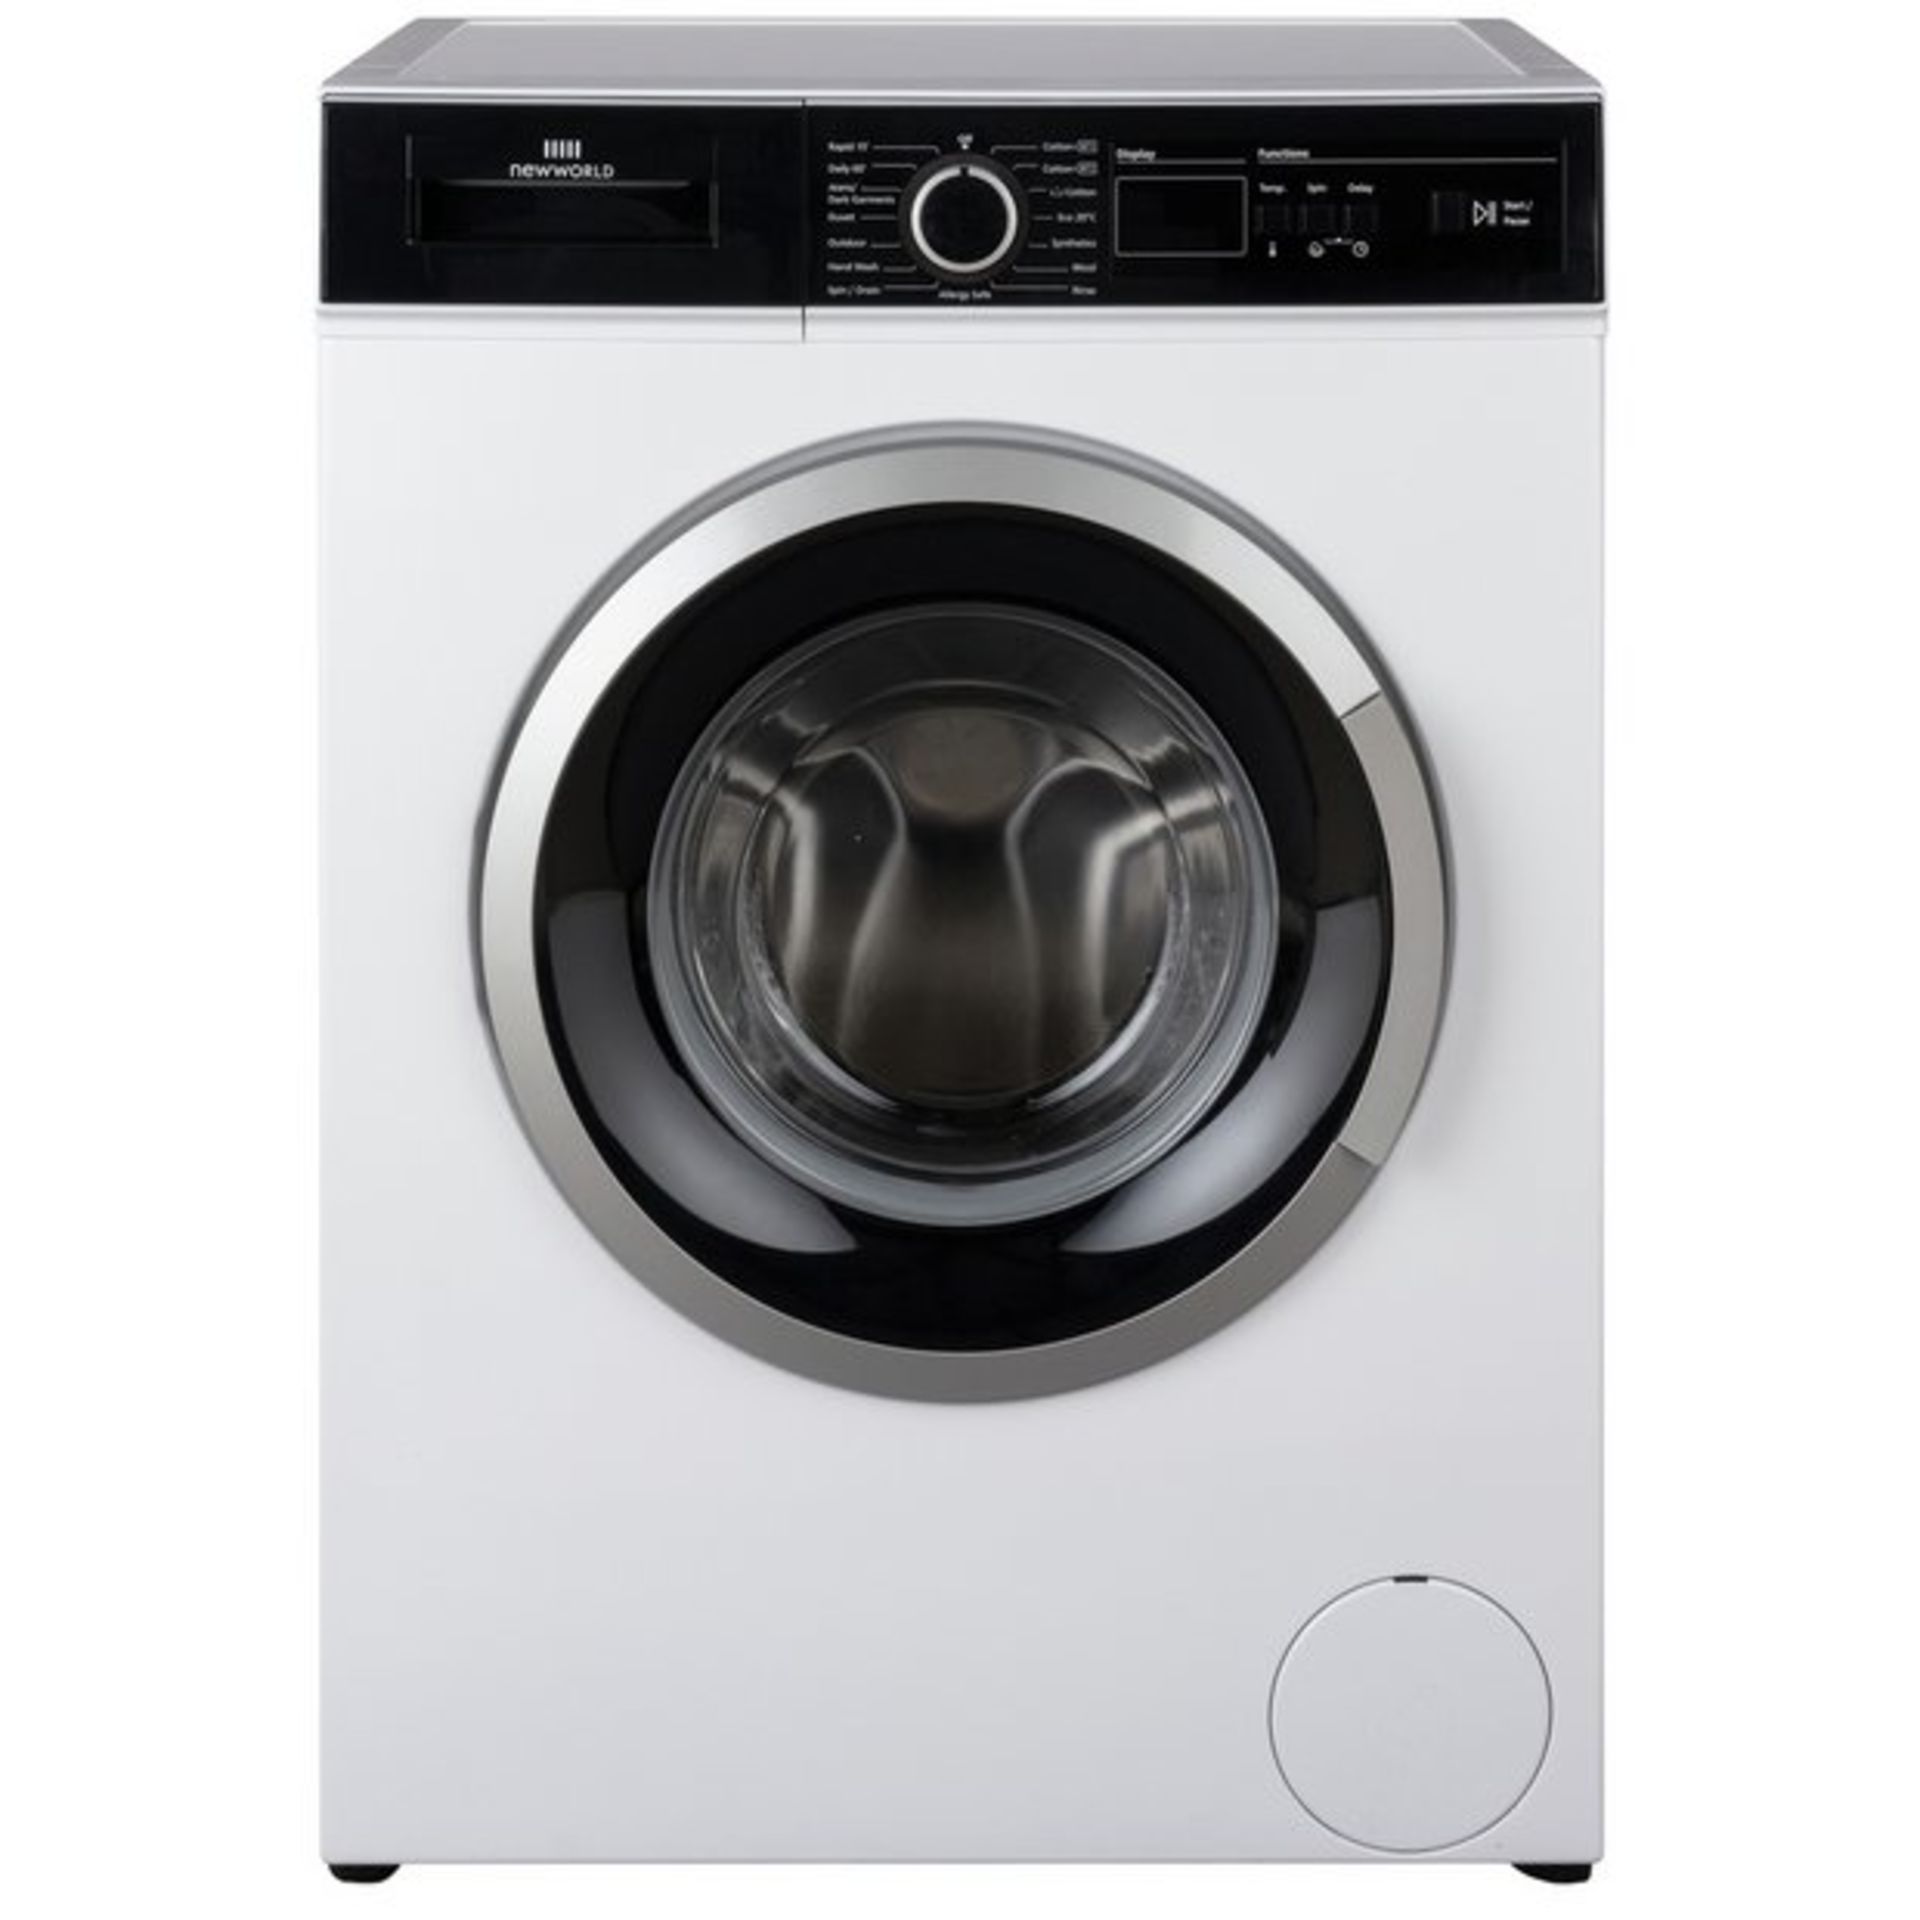 + VAT Grade A/B New World NWDHT914W 9Kg 1400 Spin Washing Machine - A+++ Energy Rating - 15 Minute